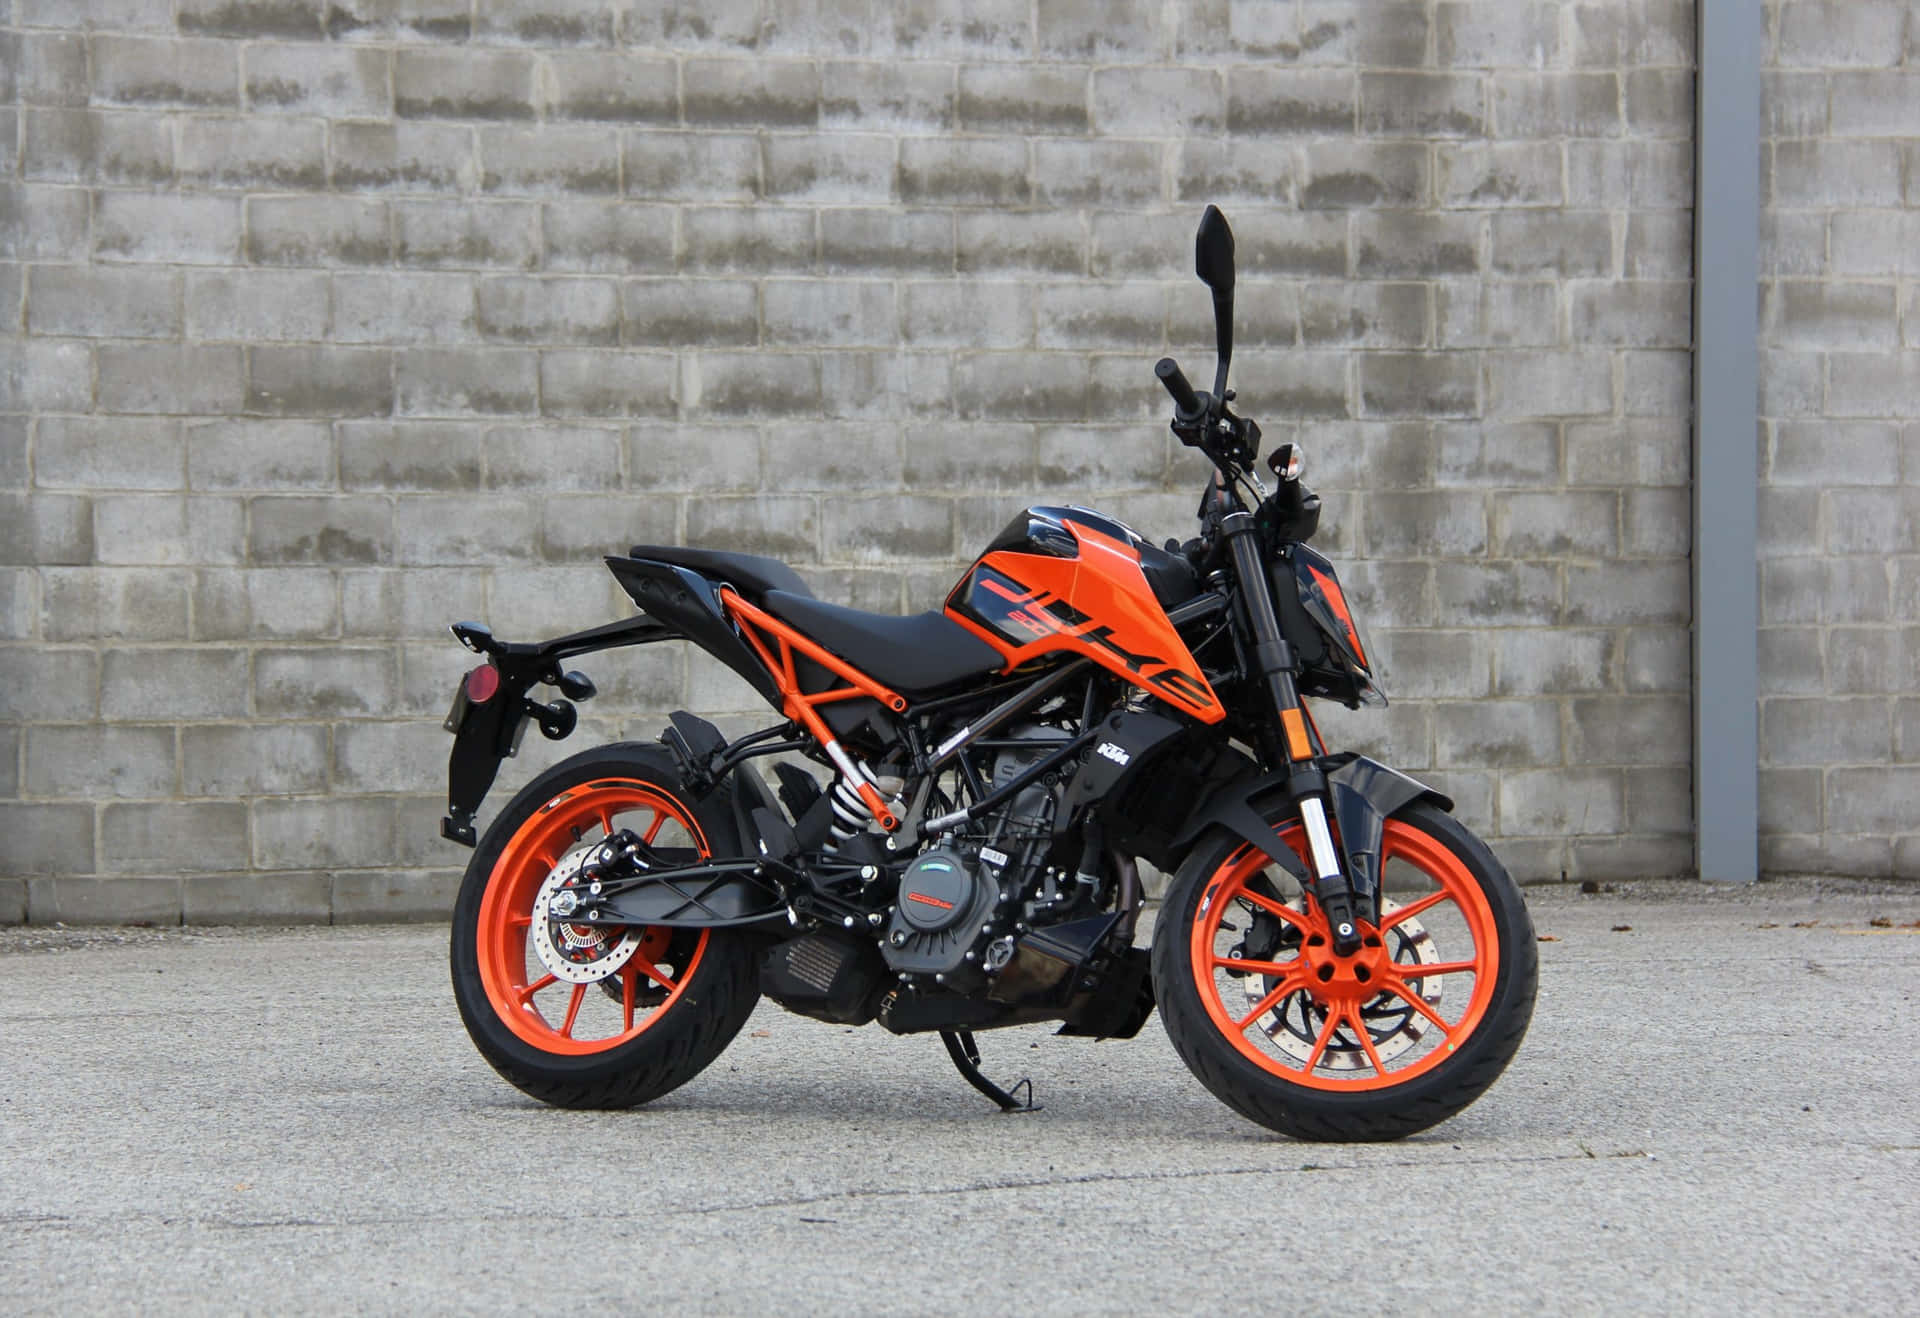 Ktm Duke 200 Motorcycle Against Brick Wall Picture